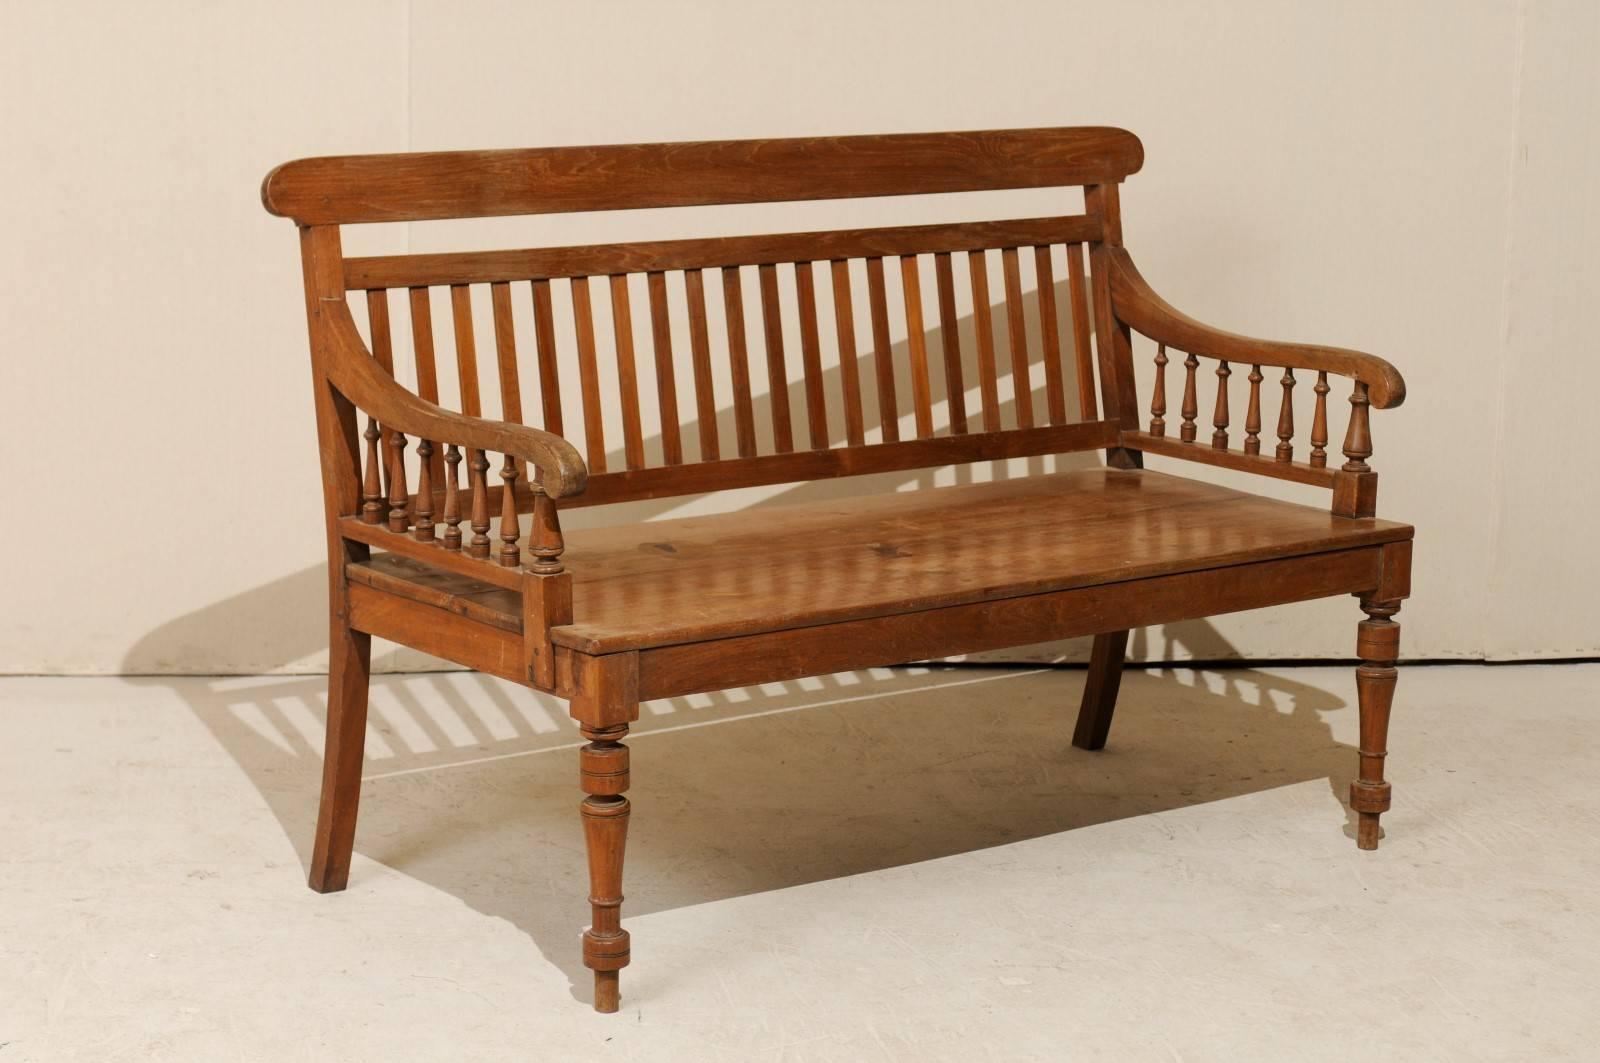 A British Colonial teak wood bench. This British Colonial style teak wood bench is from the mid-20th century, India. This sofa bench features turned front legs, a vertical slat back, bannister style arms and curled knuckles. Teak is a tropical